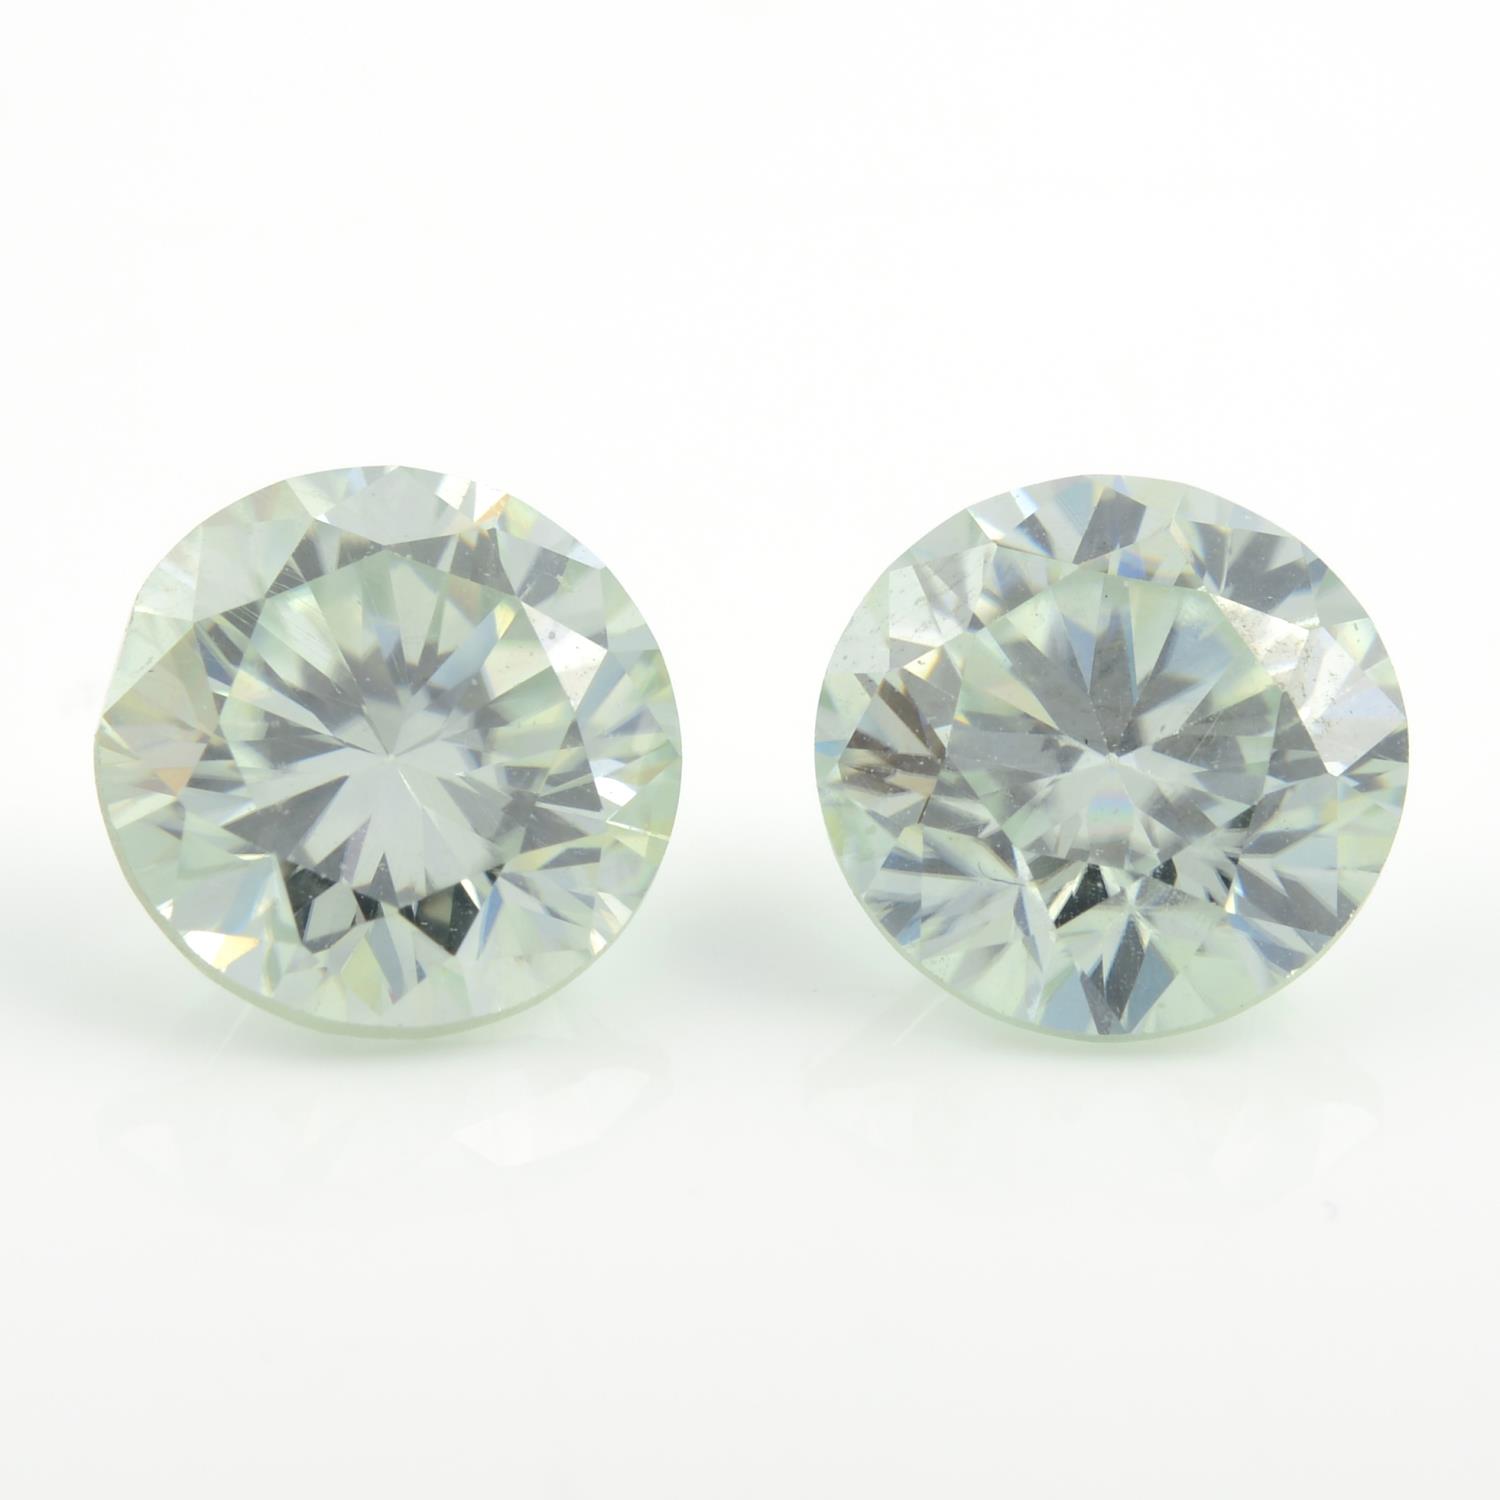 A pair of circular-shape synthetic moissanites.